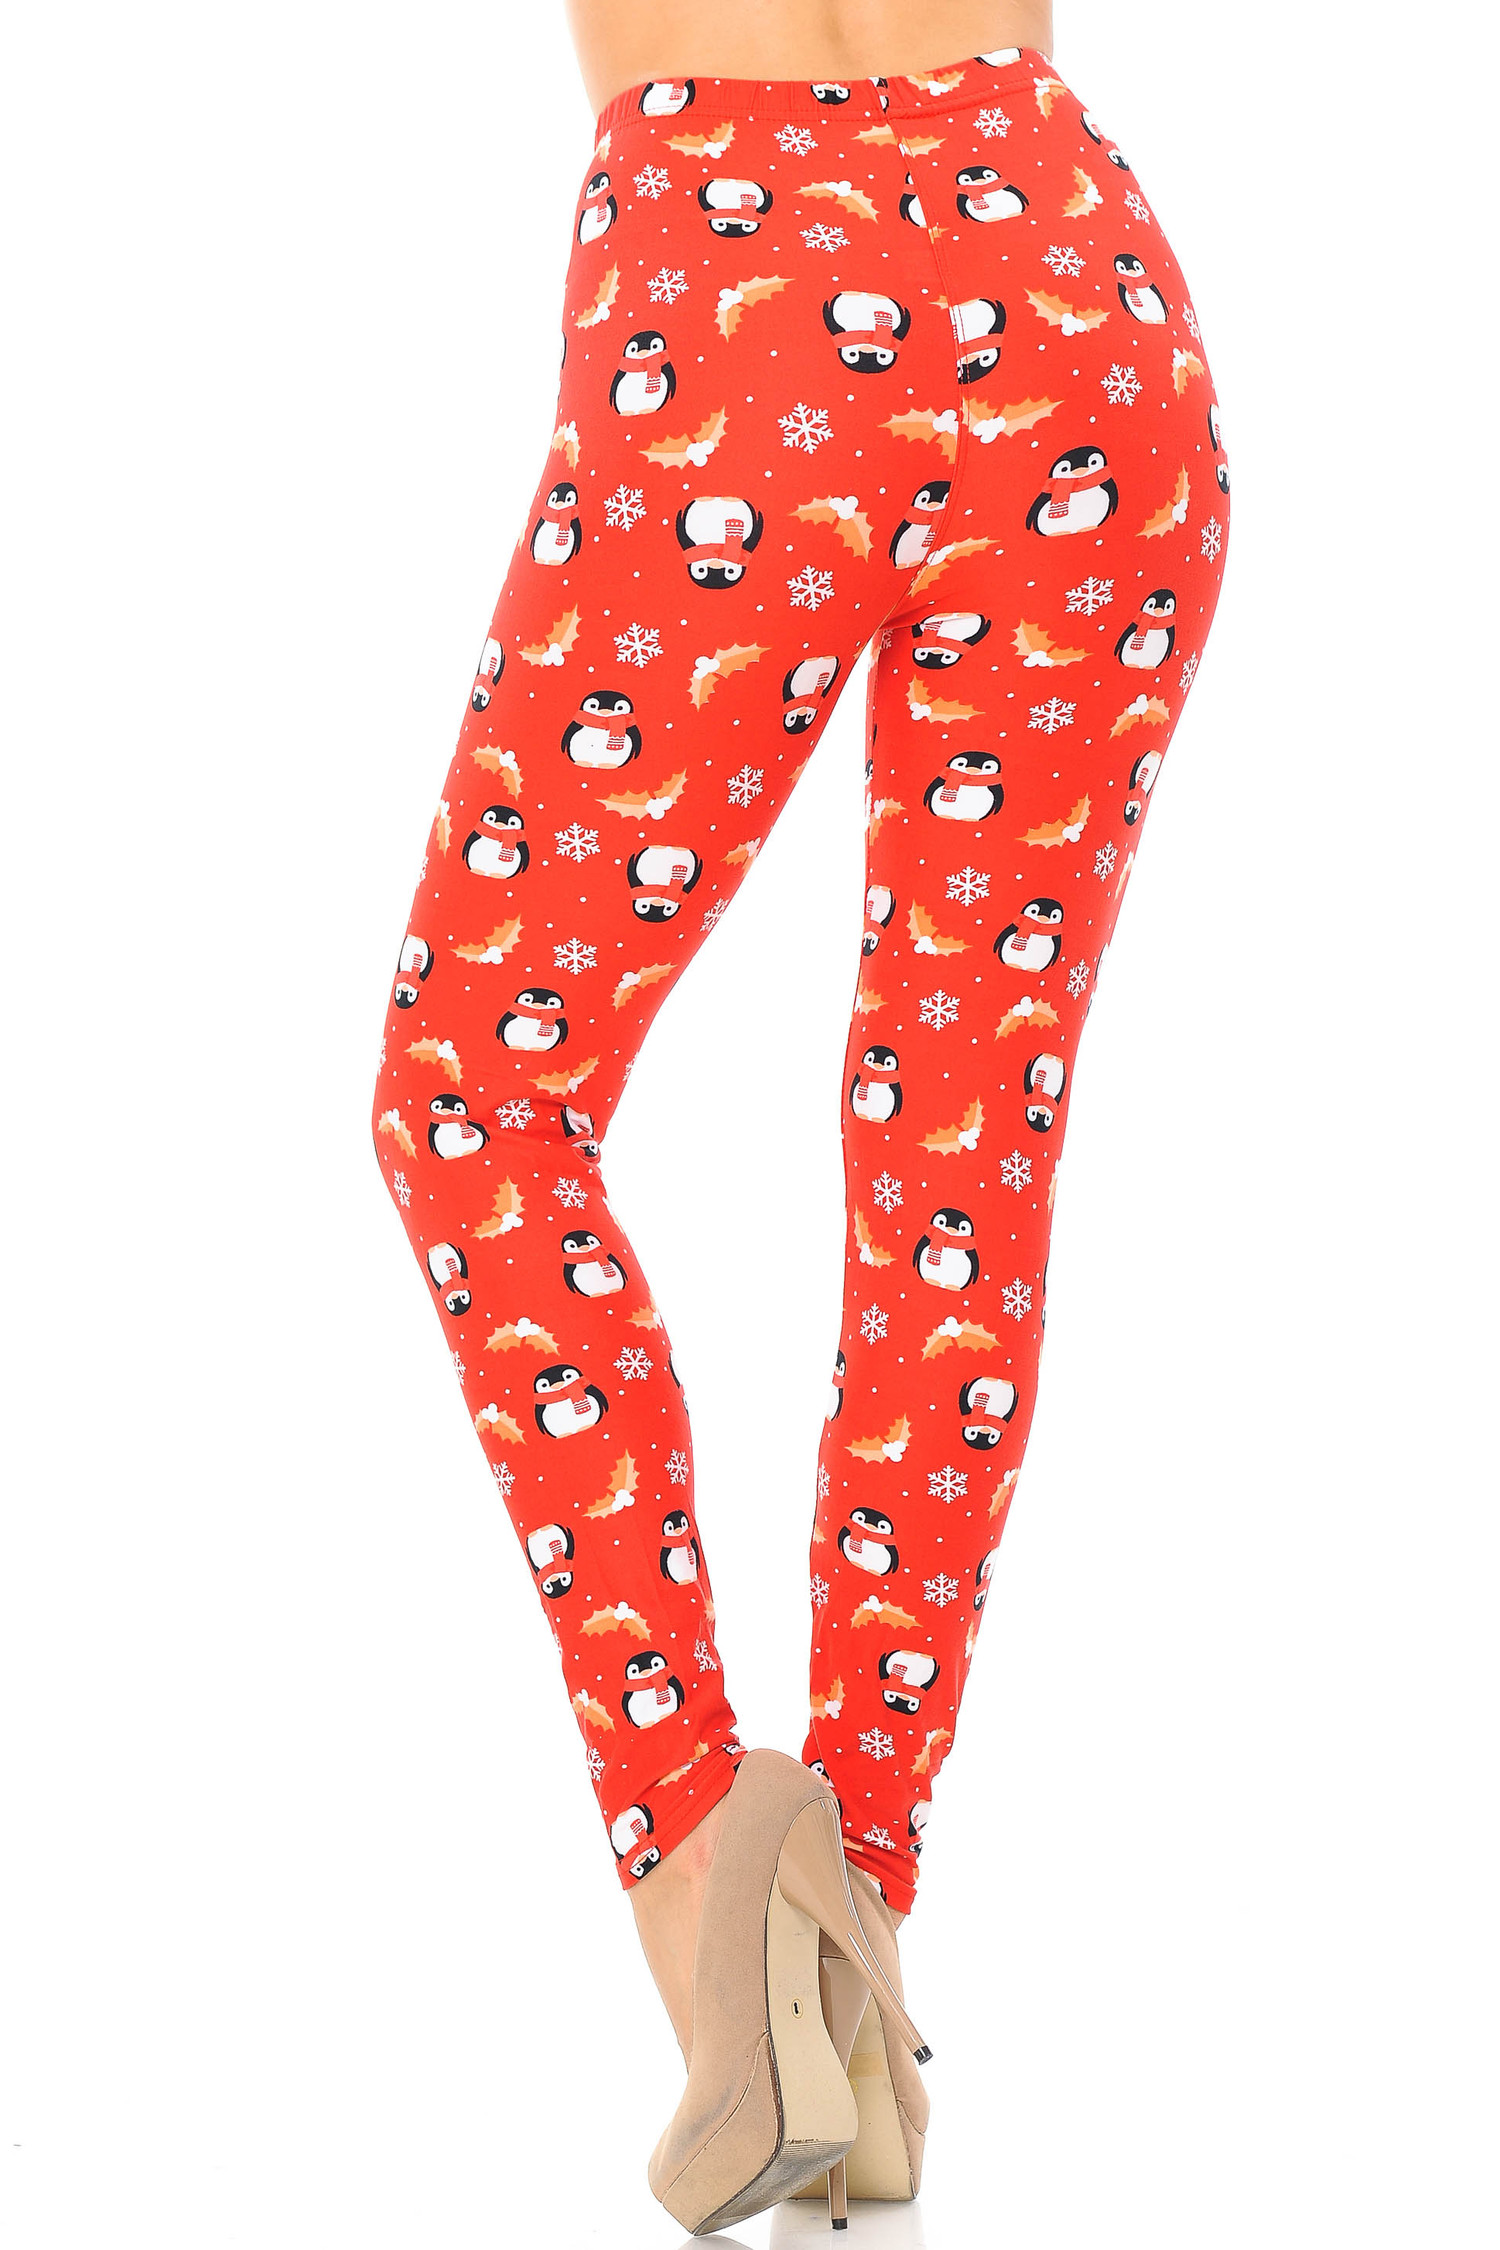 Buttery Soft Ruby Red Penguins Mistletoe and Snowflake Extra Plus Size  Leggings - 3X-5X